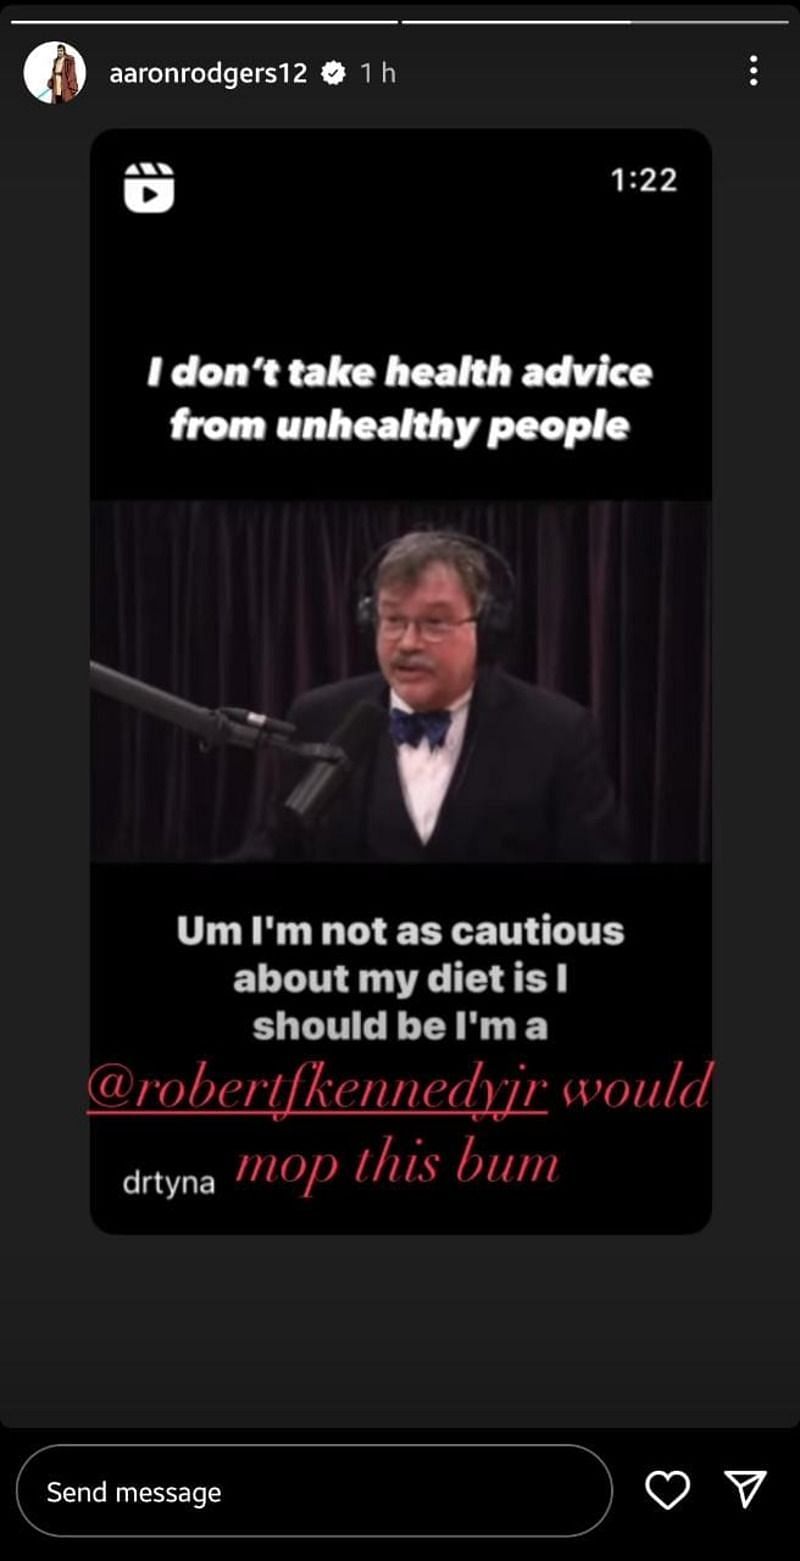 Quarterback Aaron Rodgers had some choice words for Peter Jay Hotez, MD, Ph.D. (Image via Aaron Rodgers on Instagram)